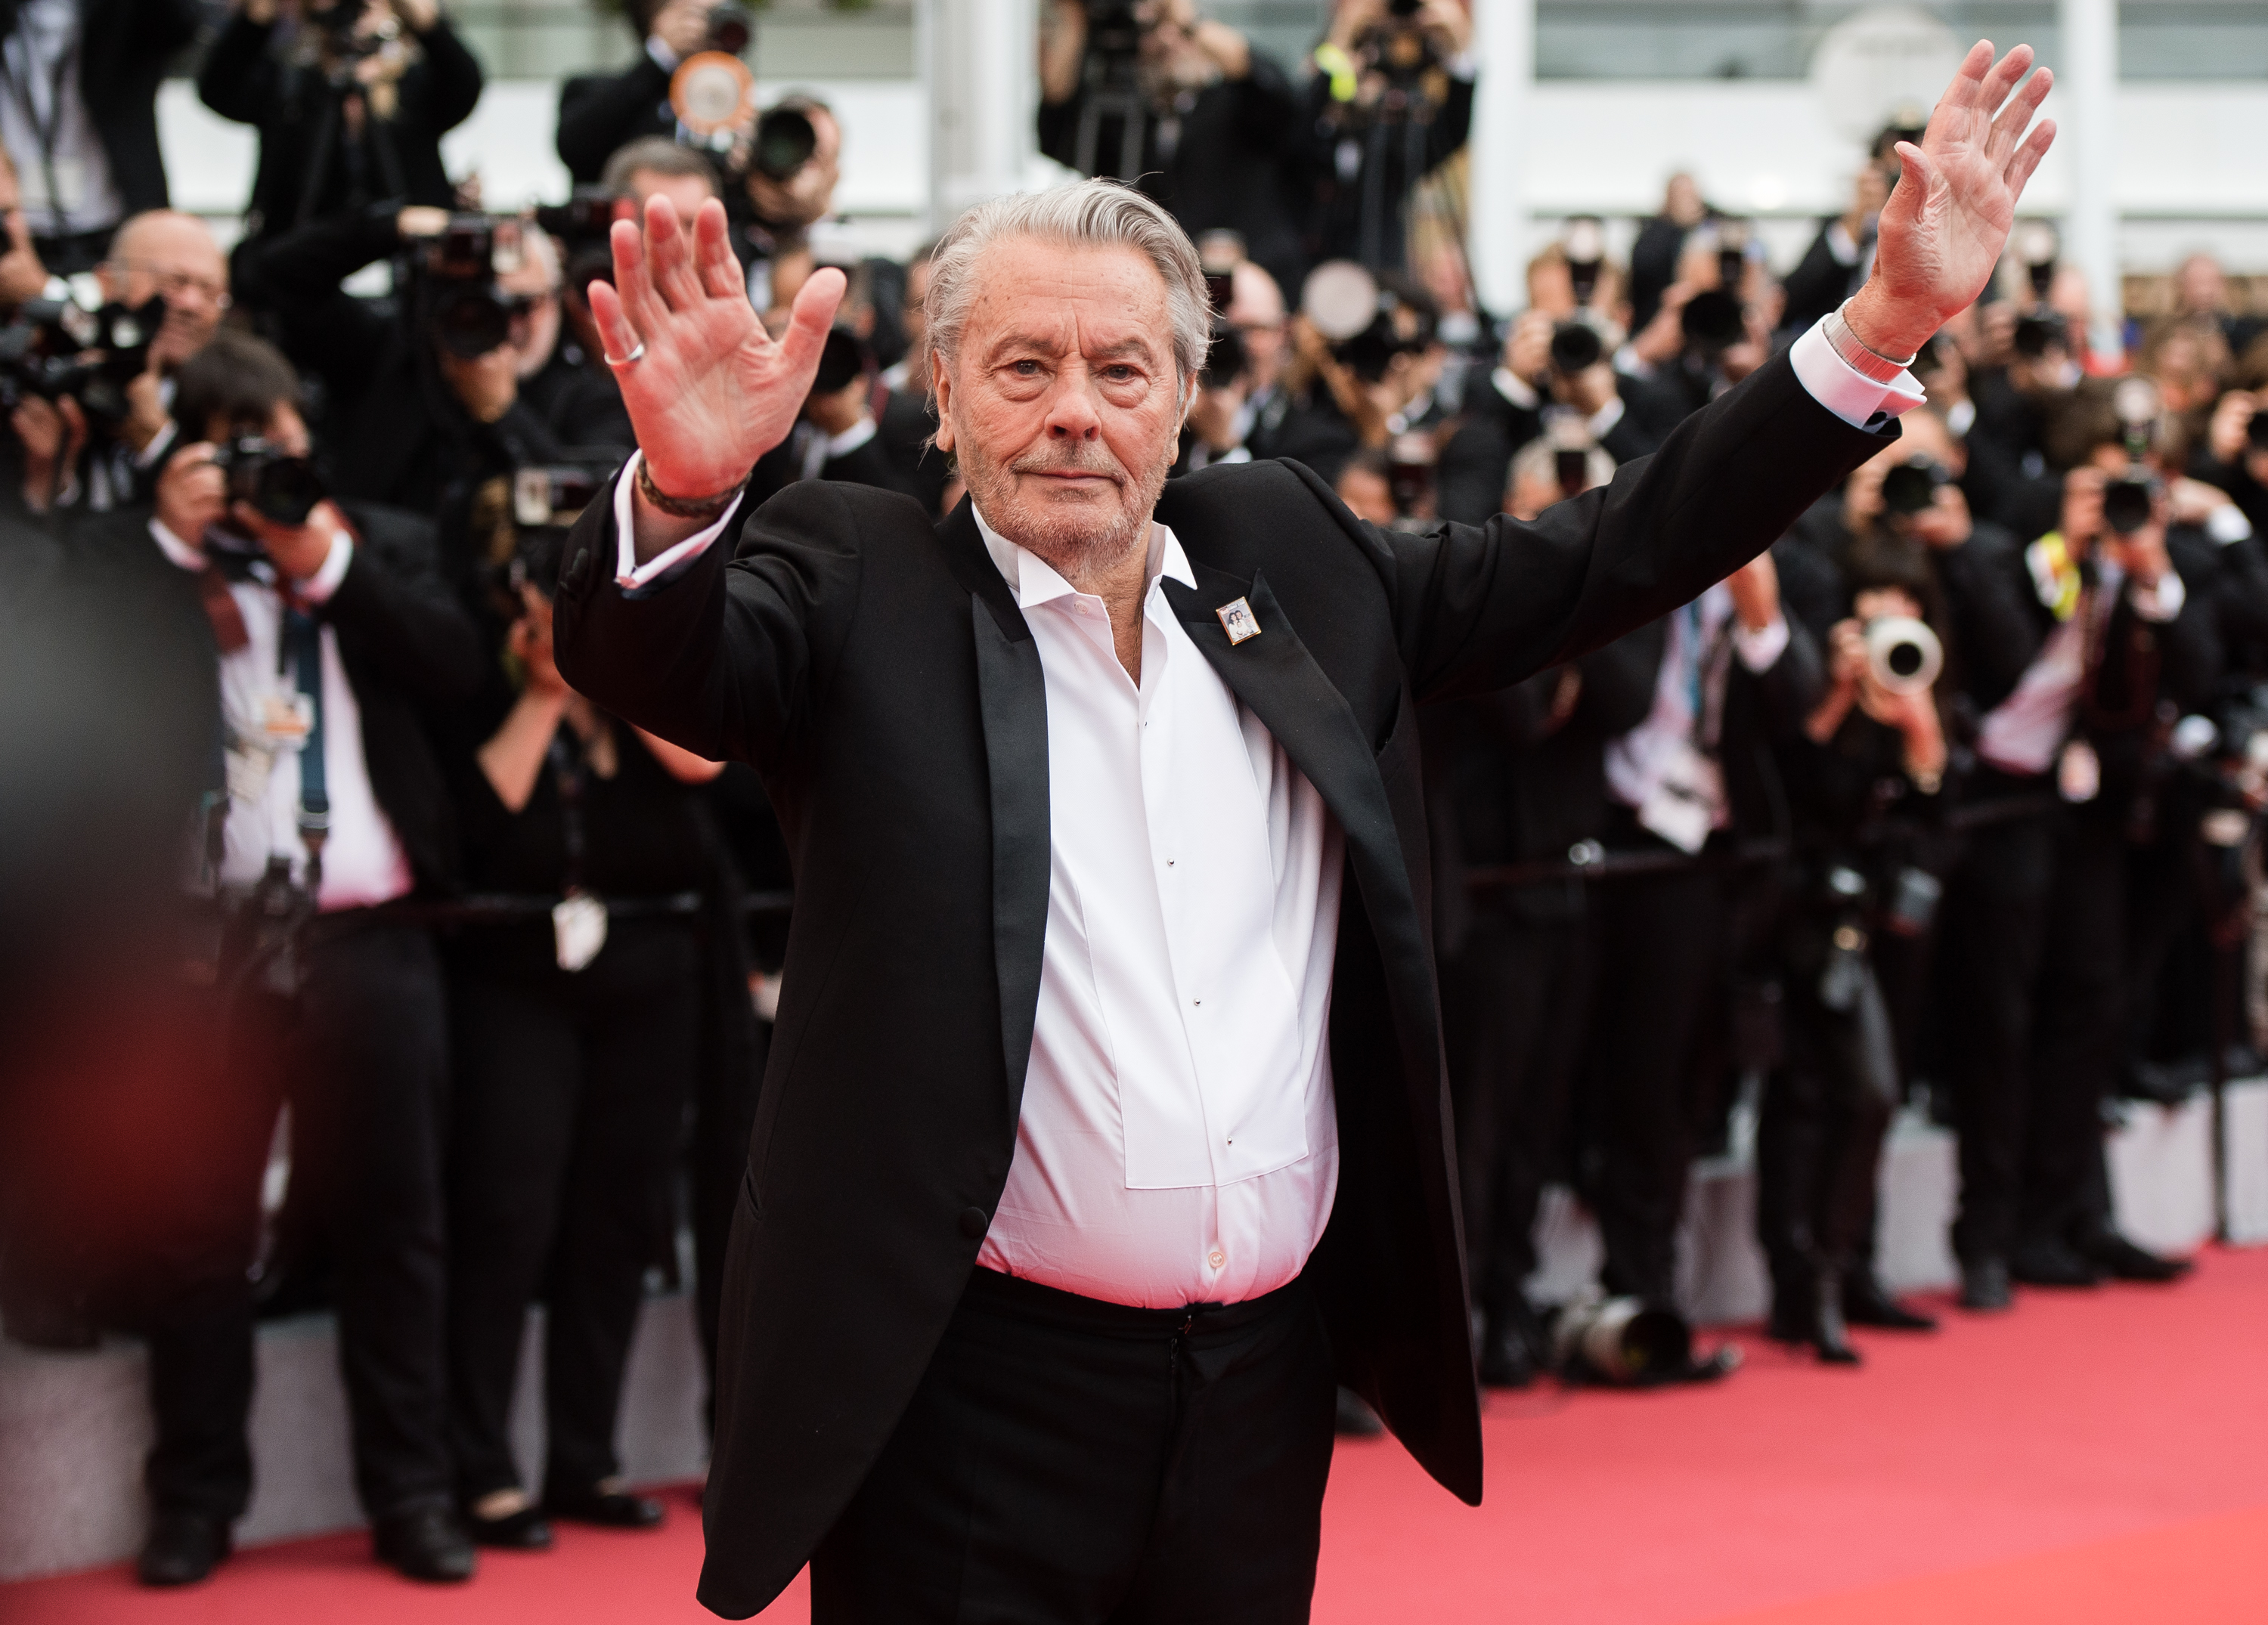 The famous French actor at the screening of "A Hidden Life (Une Vie Cachée)" during the 72nd annual Cannes Film Festival in Cannes, France on May 19, 2019 | Source: Getty Images